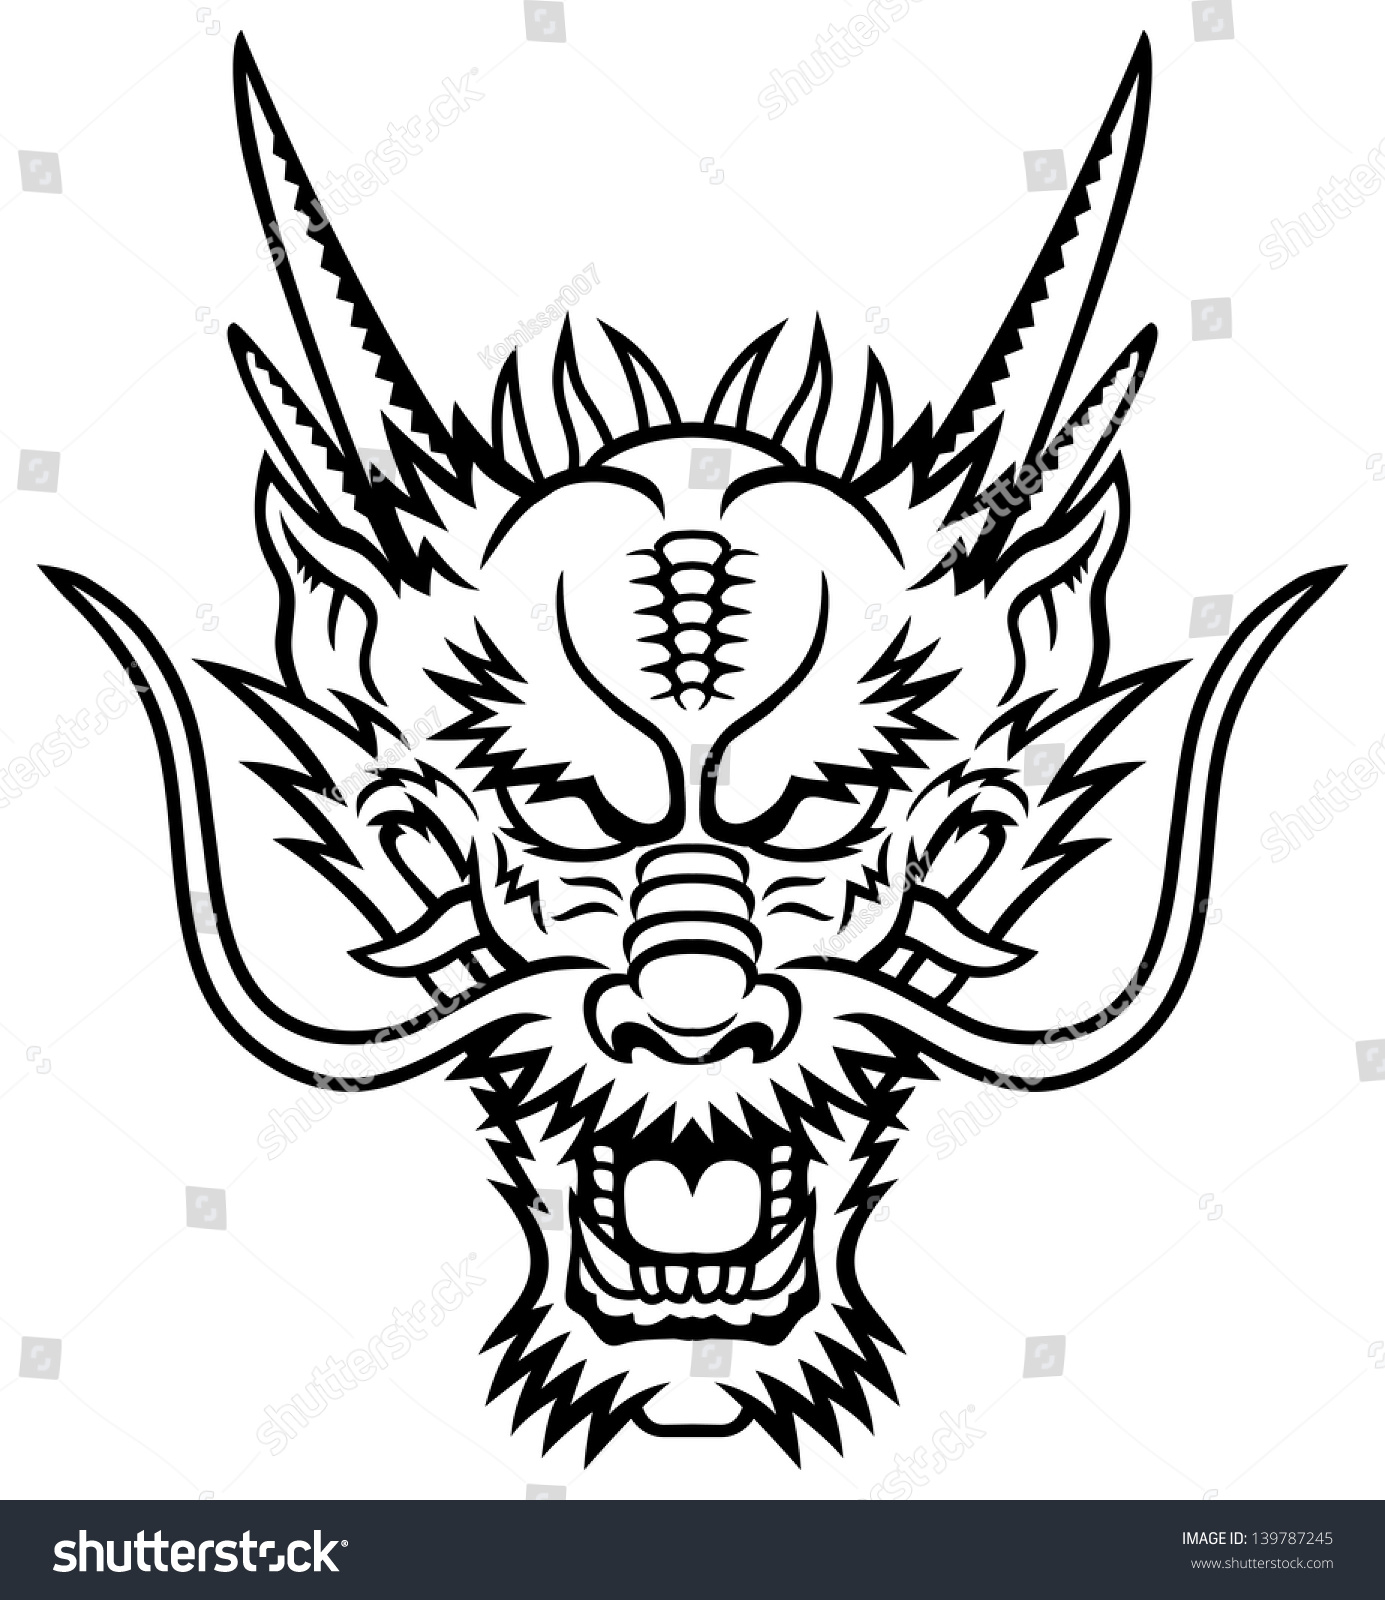 Royalty Free A Dragon Head Logo This Is 139787245 Stock Photo